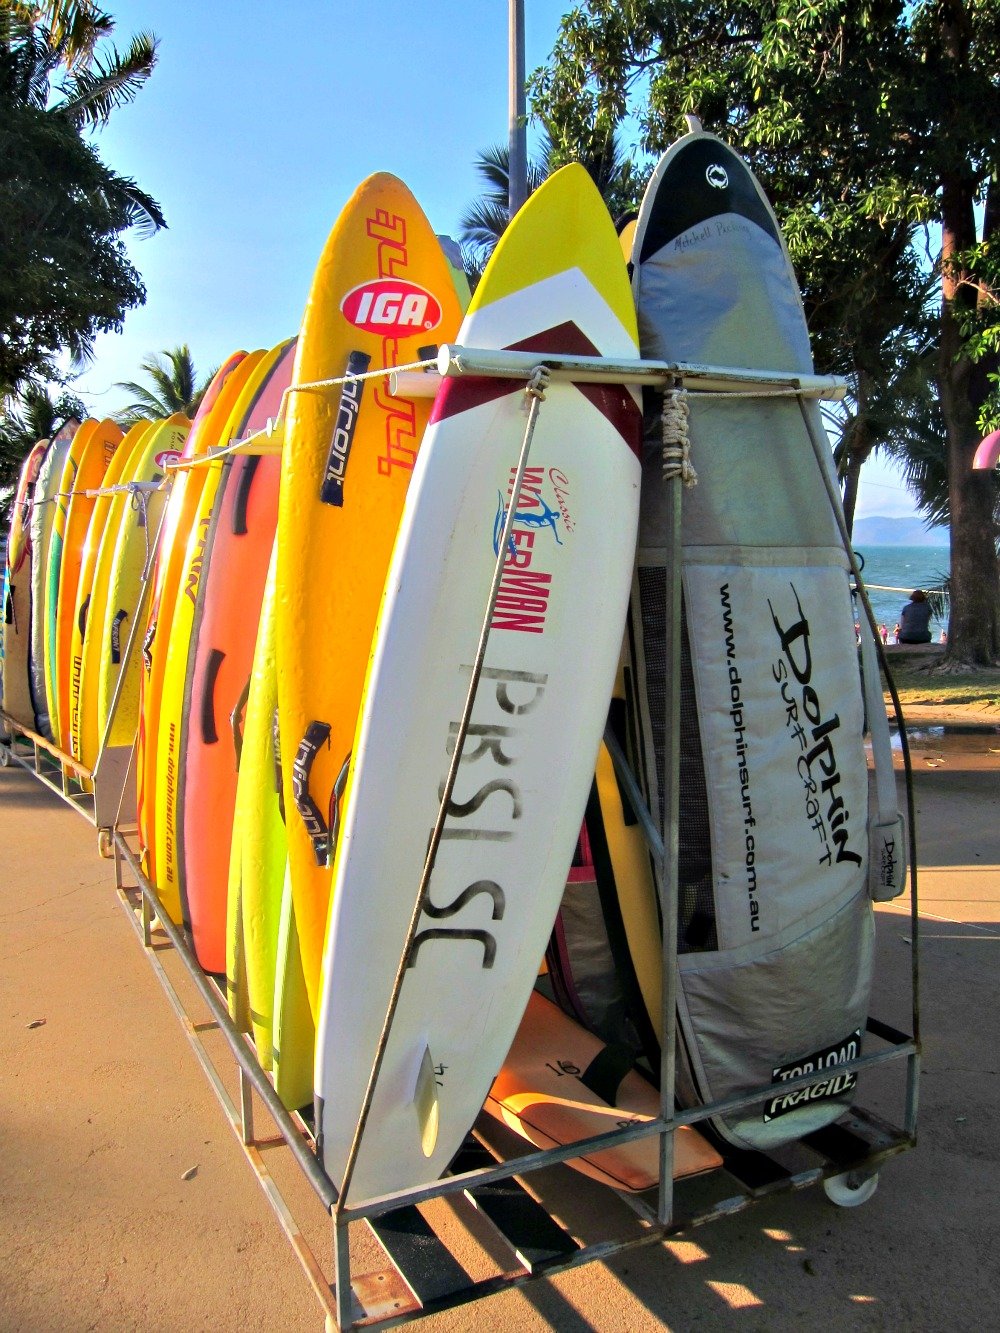 Surf Life Saving Boards - Picnic Bay S.L.S.C. - The Strand, Townsville